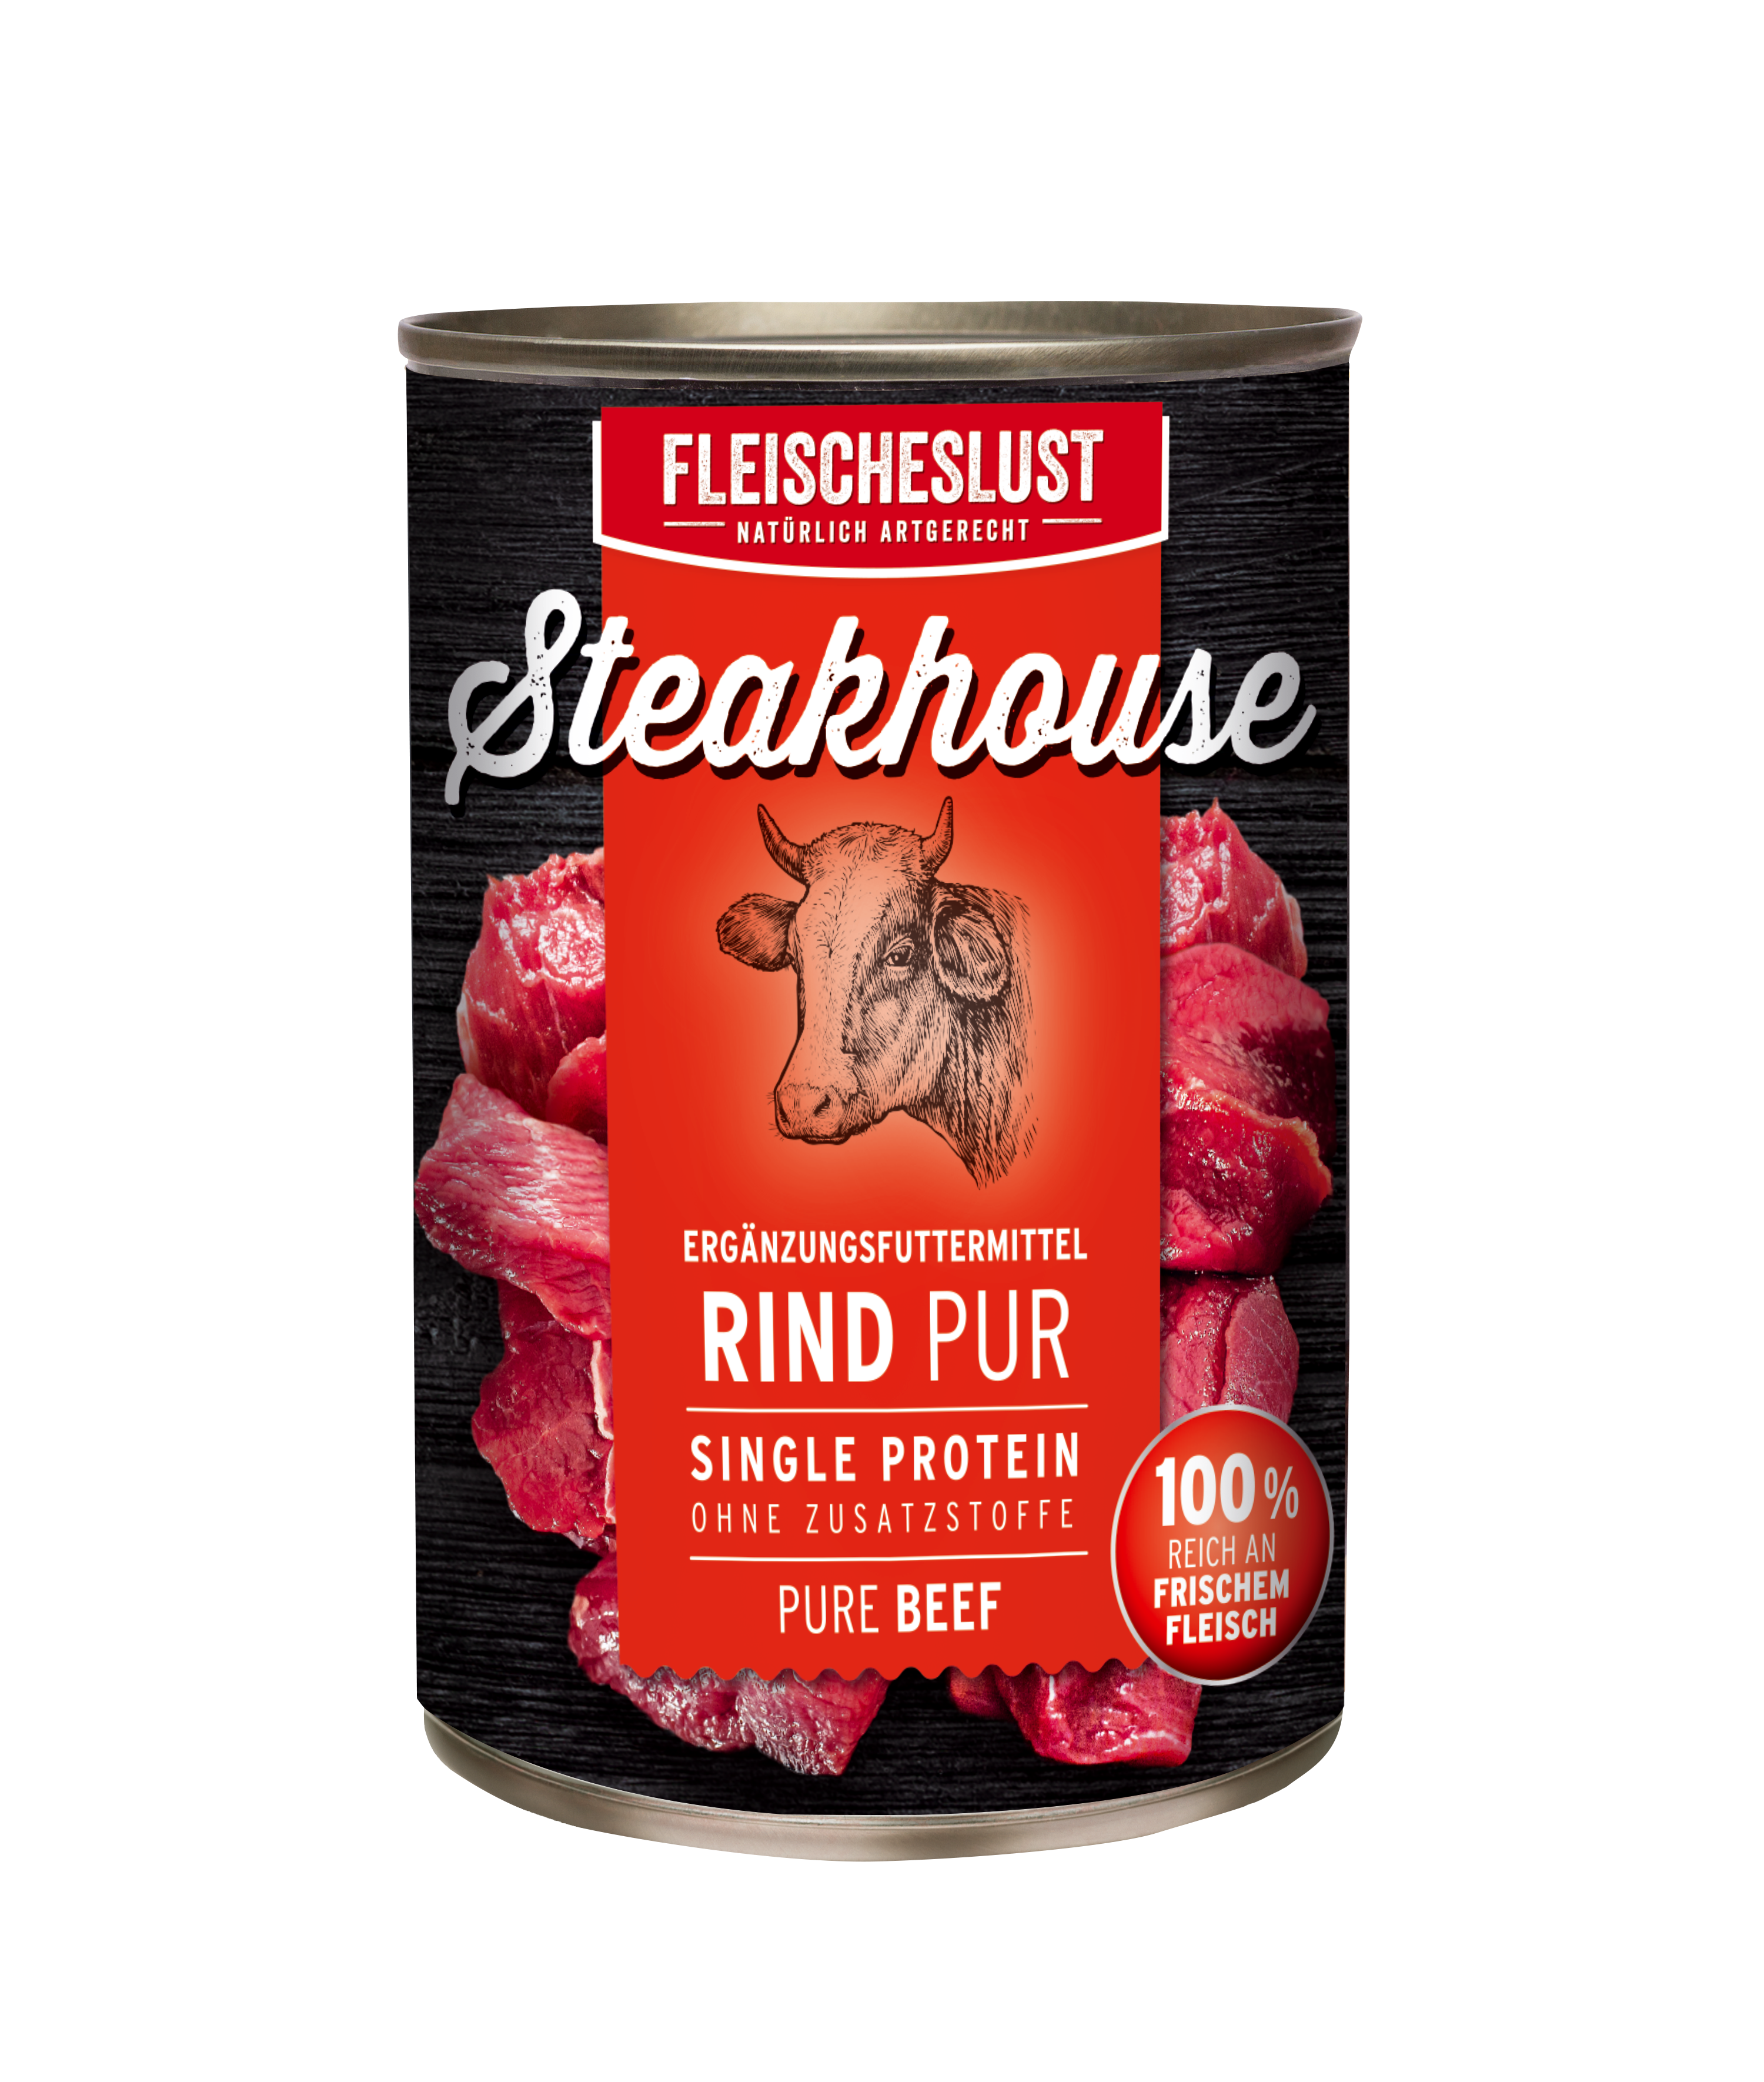 Steakhouse Rind pur